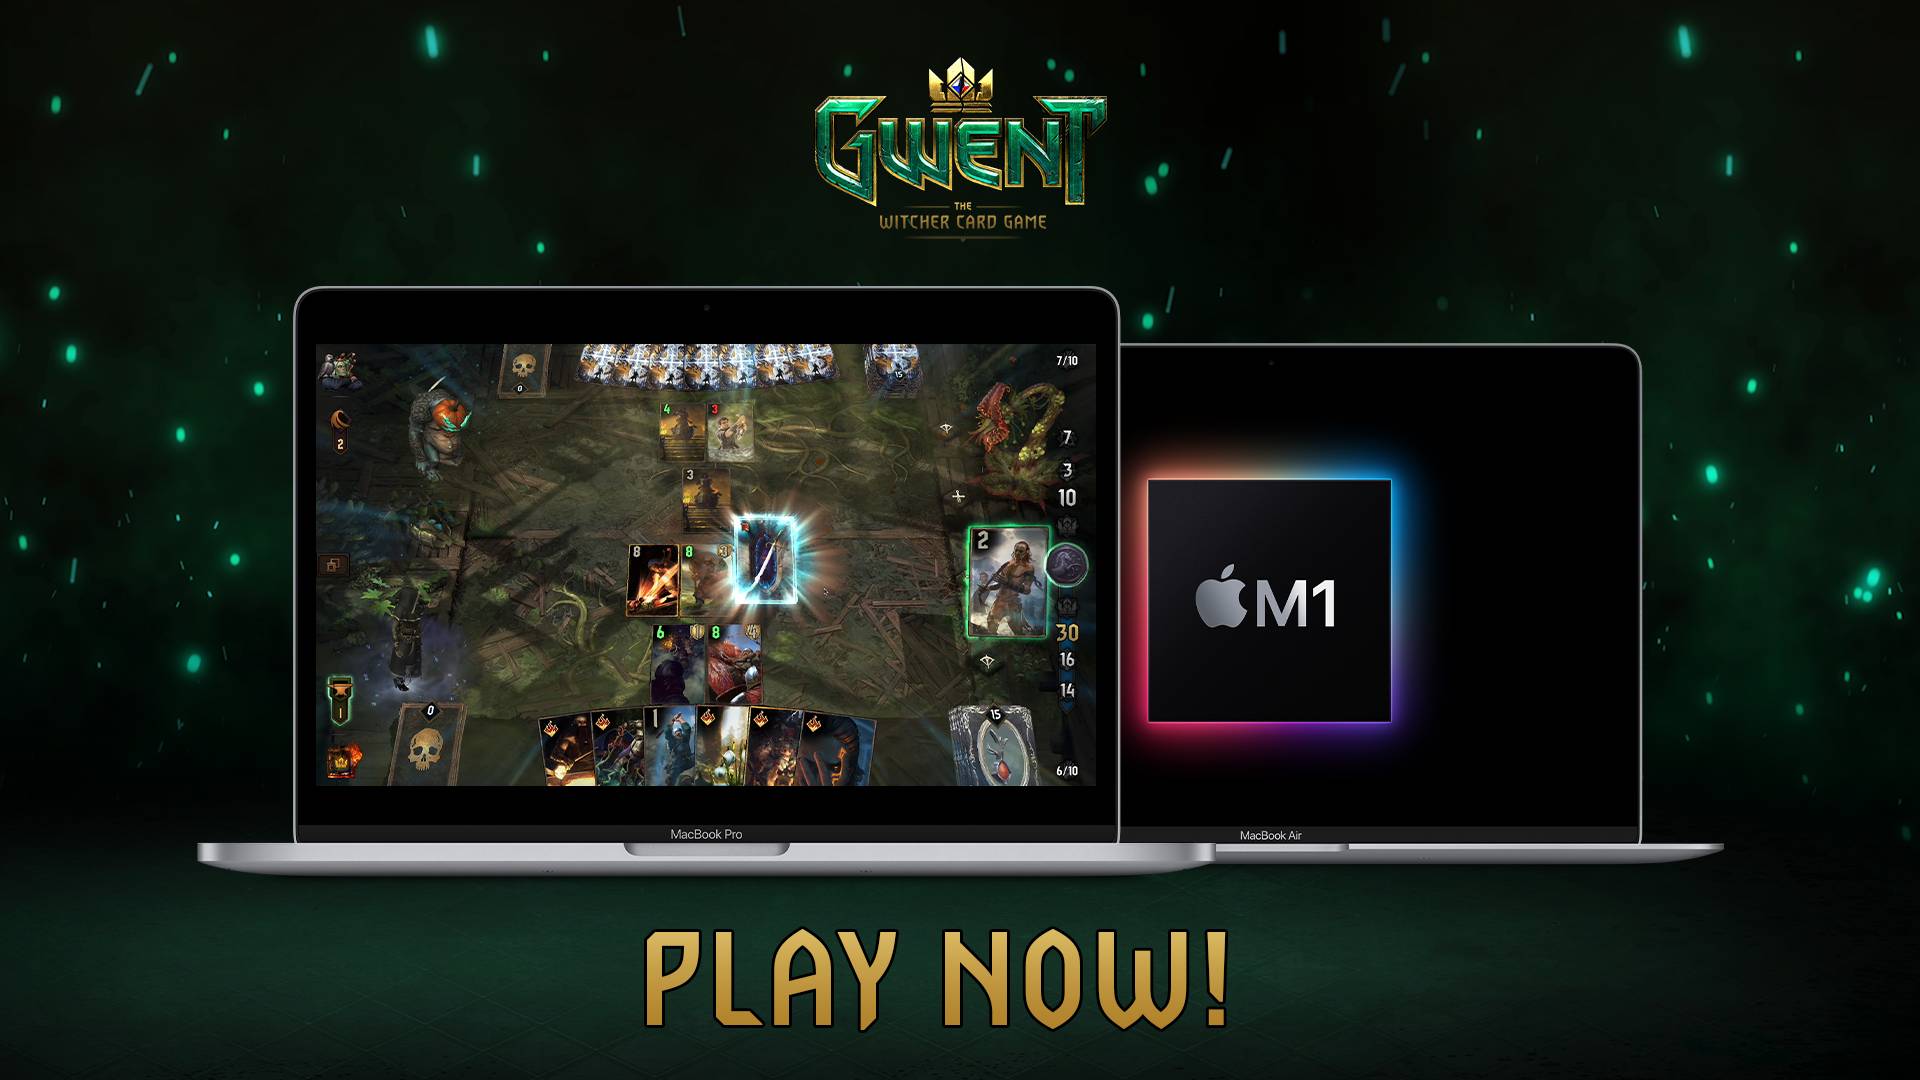 Can You Play League of Legends on Mac? [M1 Included]